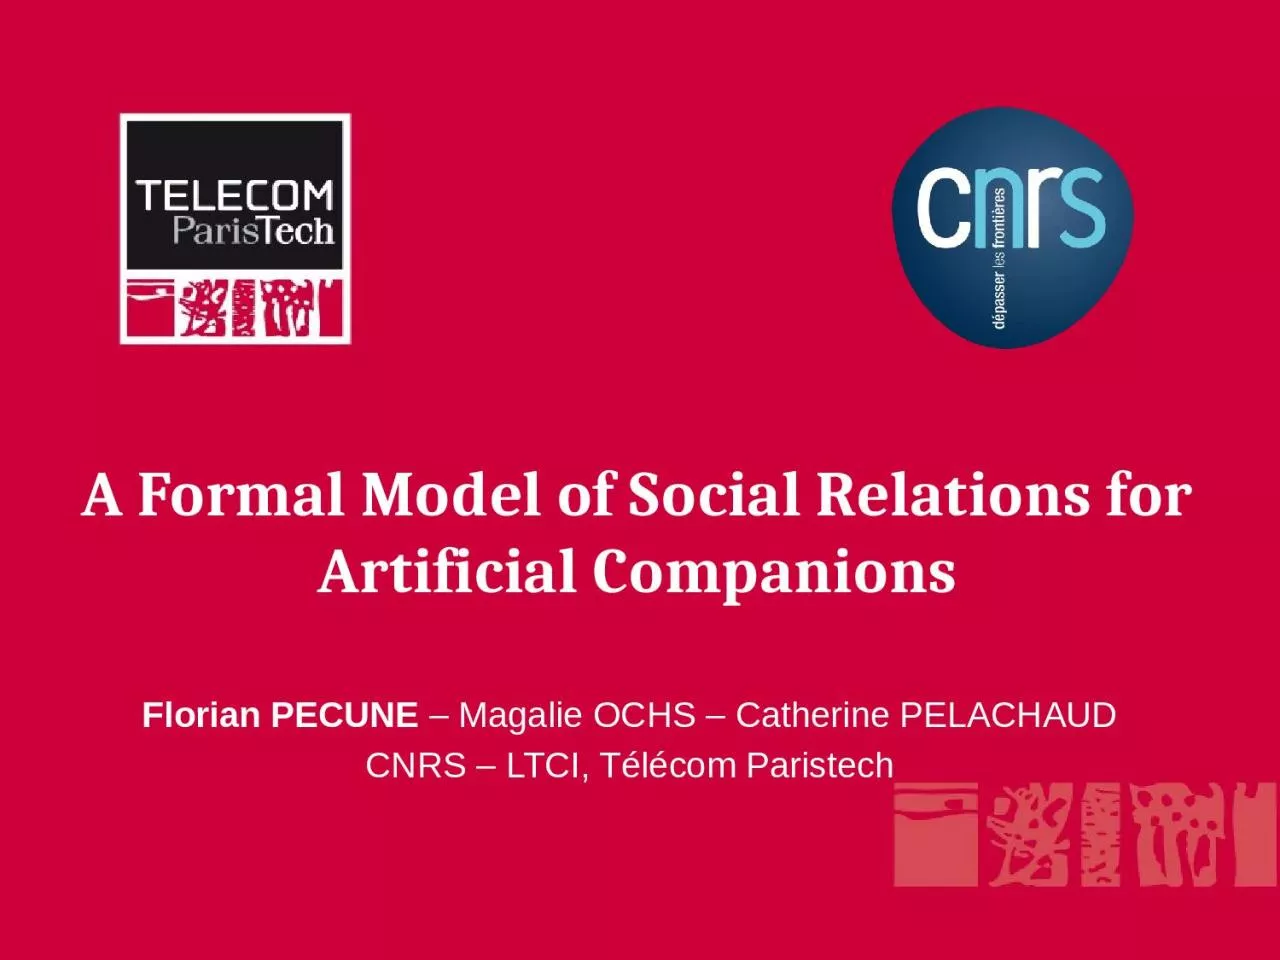 A Formal Model of Social Relations for Artificial